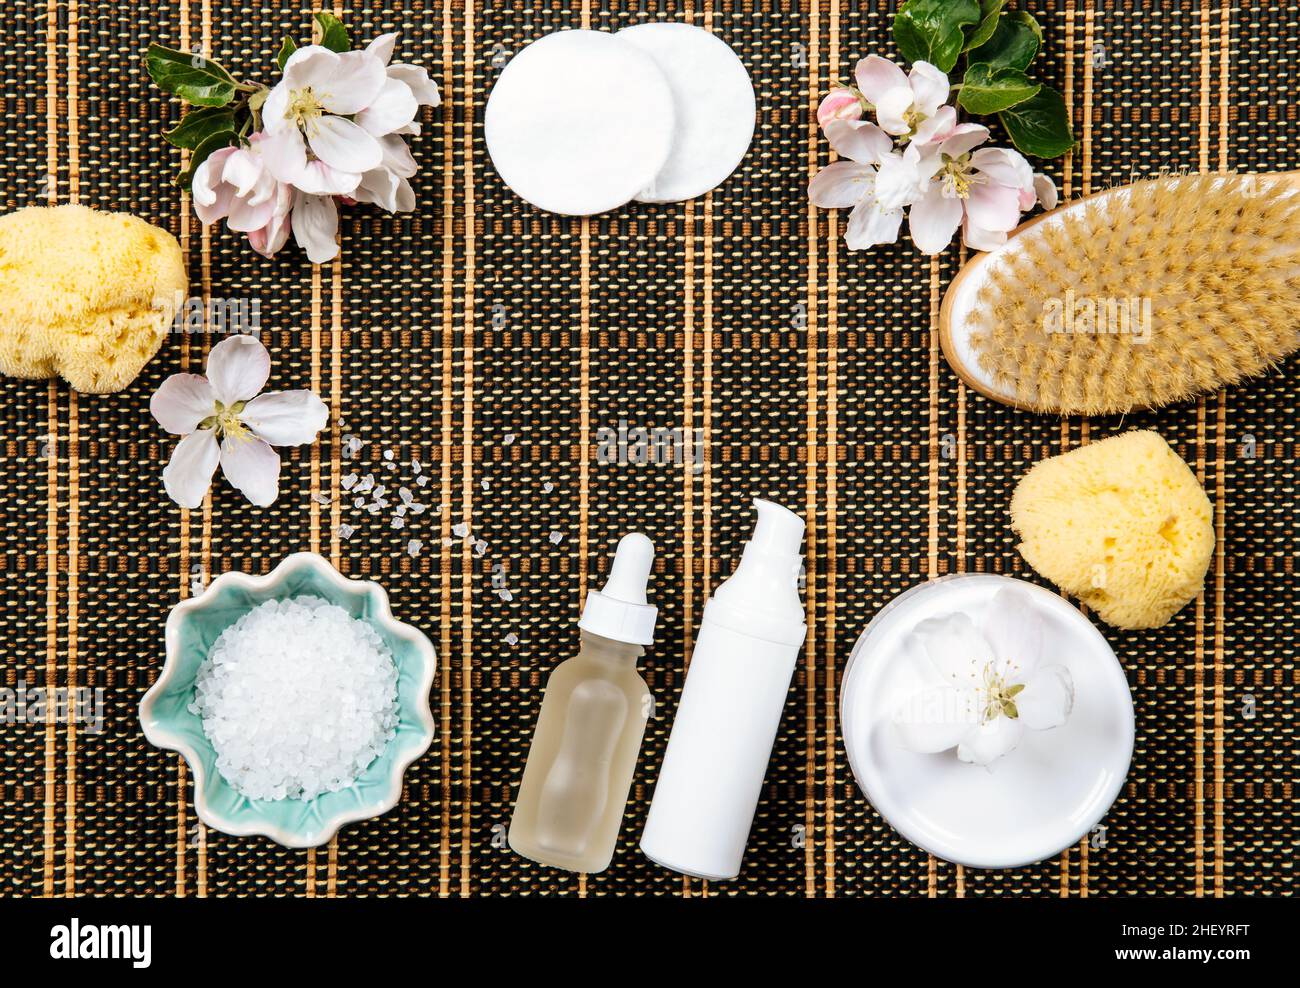 Spa body and skin care products background frame. Copy space in the center. Various beauty products: bath salt, sponge, moisturizing creams. Stock Photo